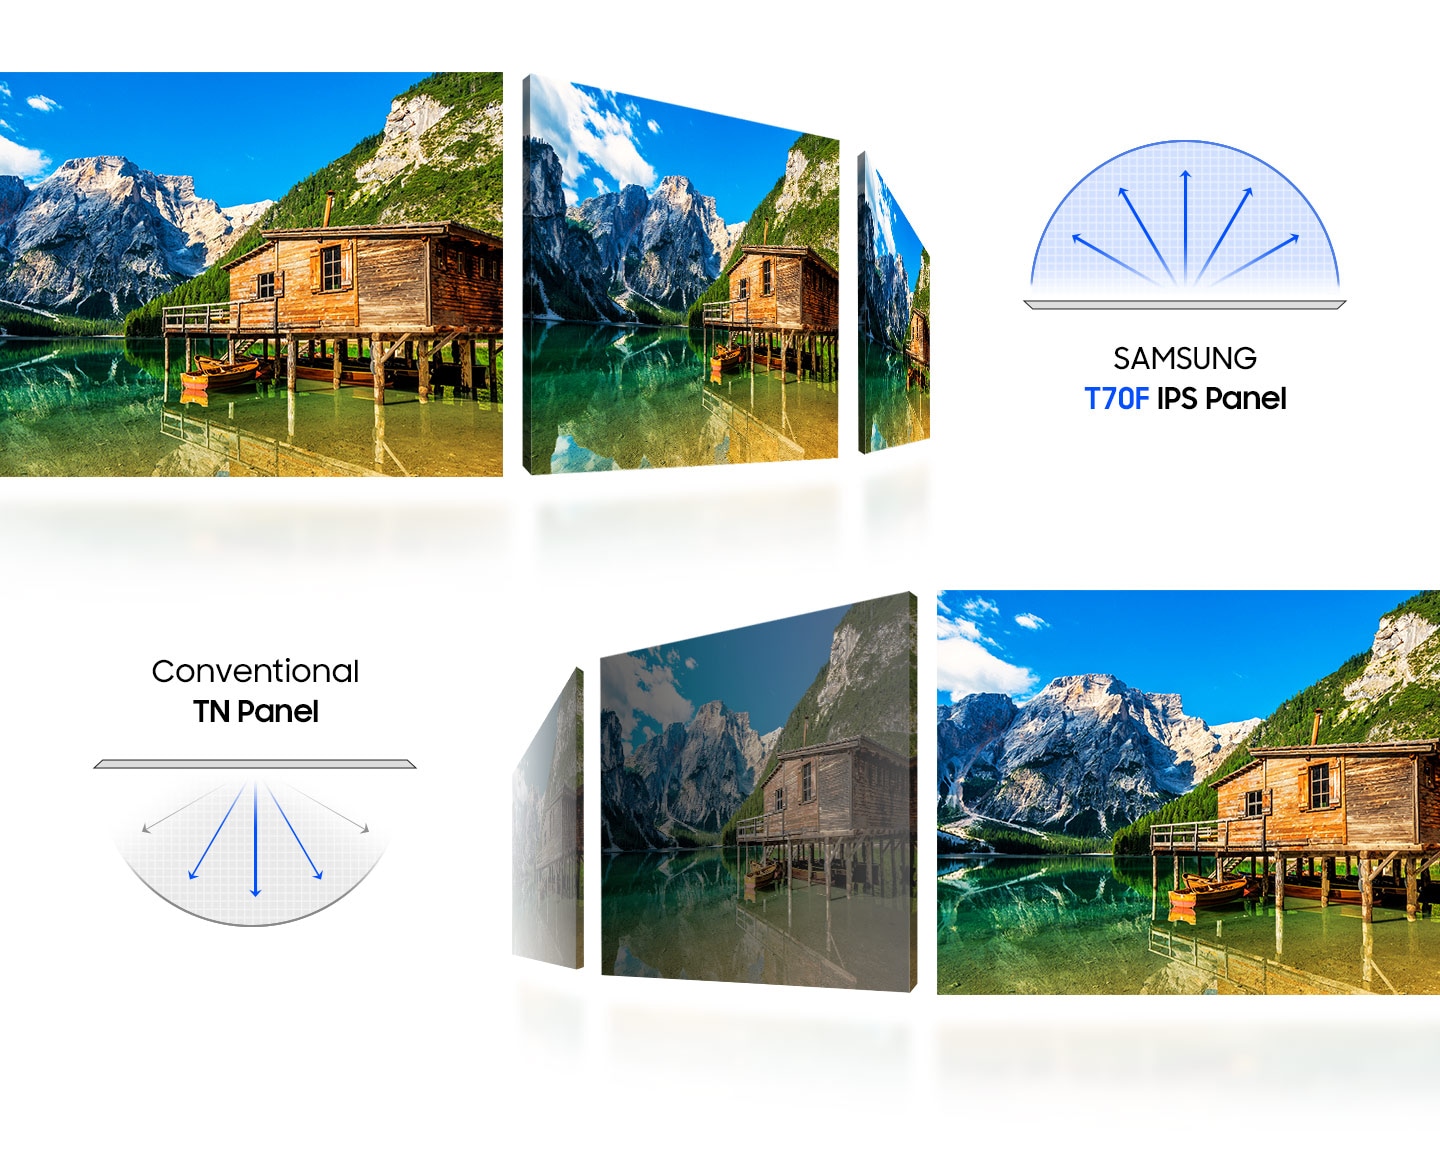 Two sets of images and icons, IPS and TN panel each, emphasizes wide viewing angle and image clarity of IPS panel.